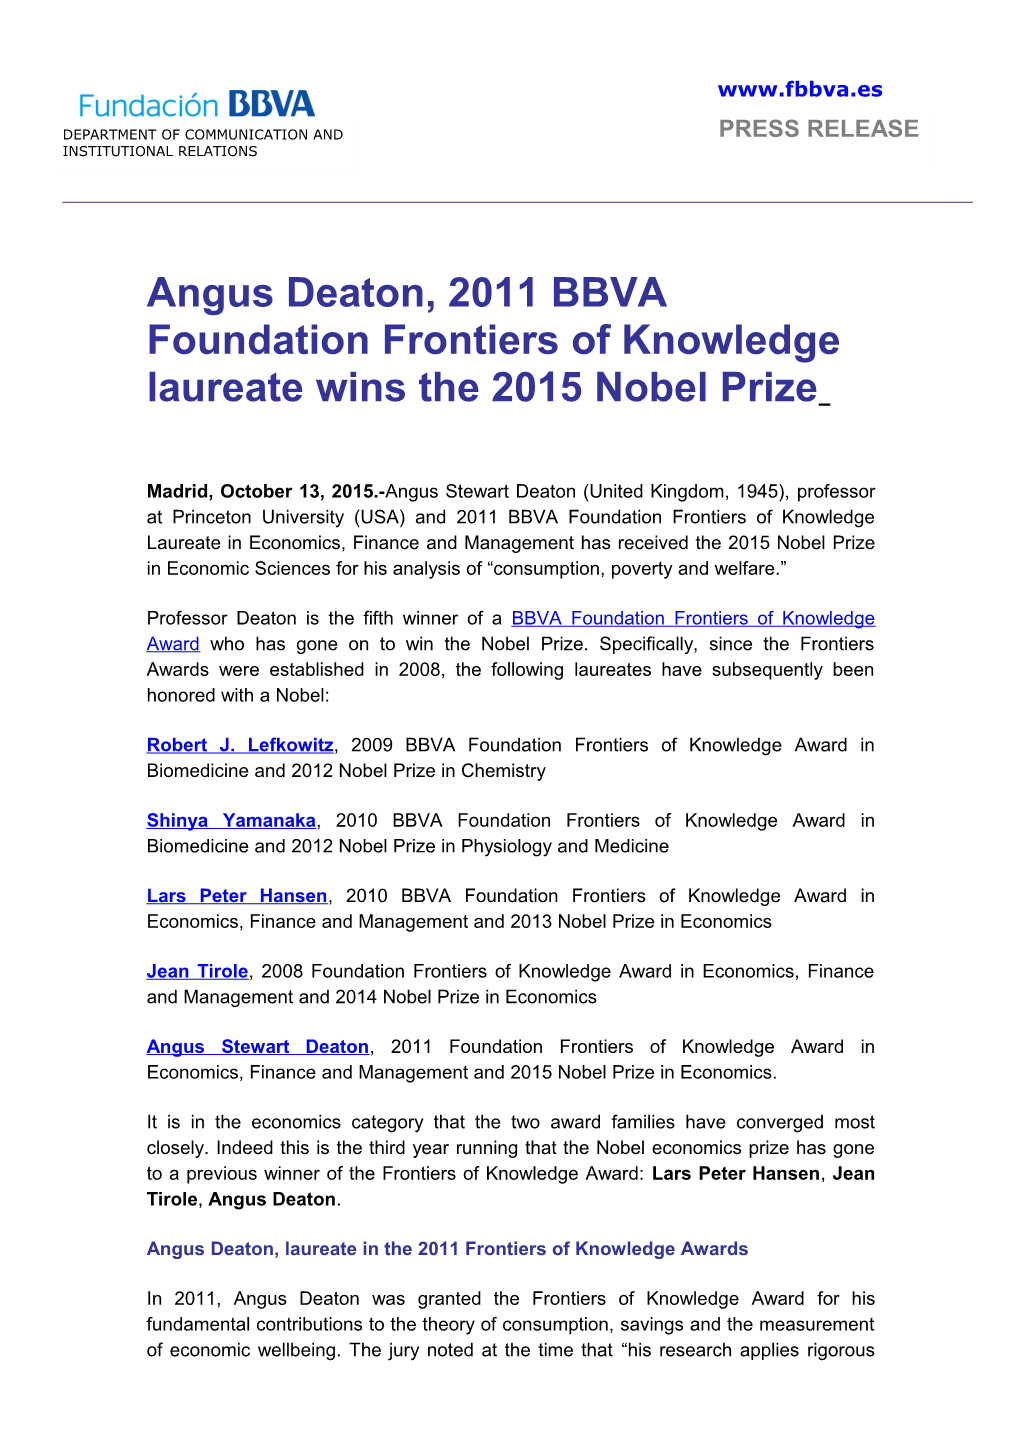 Angus Deaton, 2011 BBVA Foundation Frontiers of Knowledge Laureate Wins the 2015 Nobel Prize